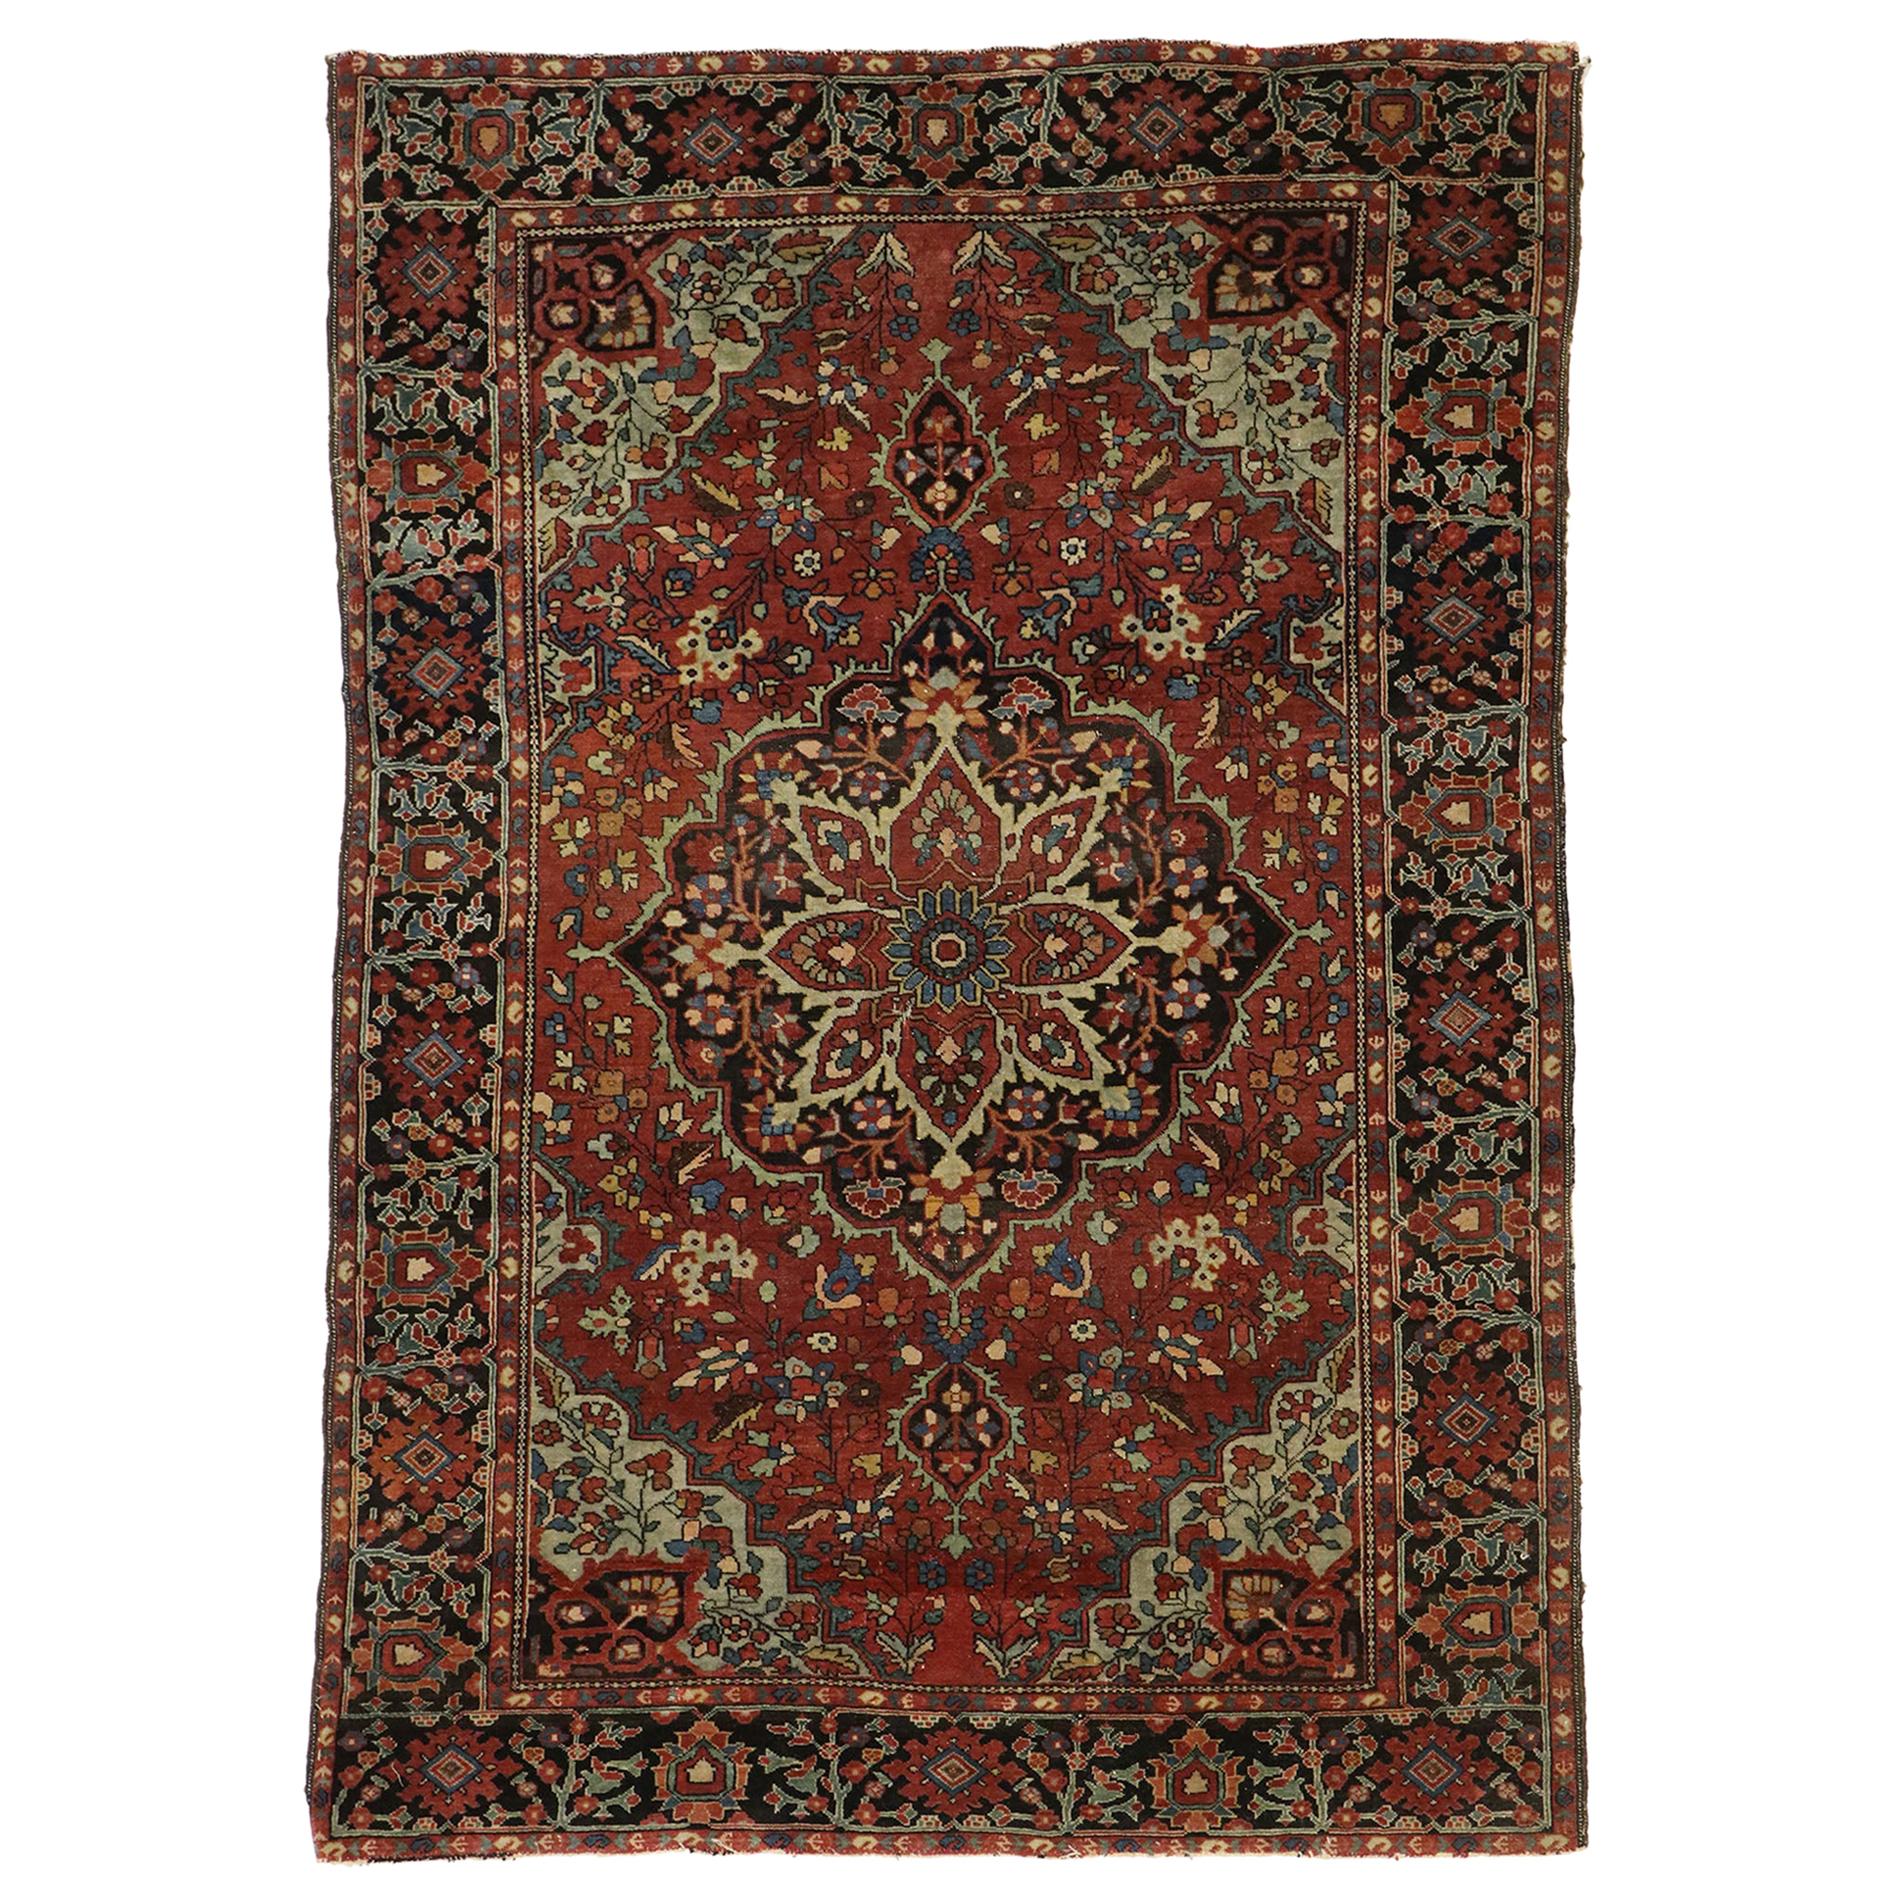 Antique Persian Farahan Accent Rug with Mid-Century Modern Style